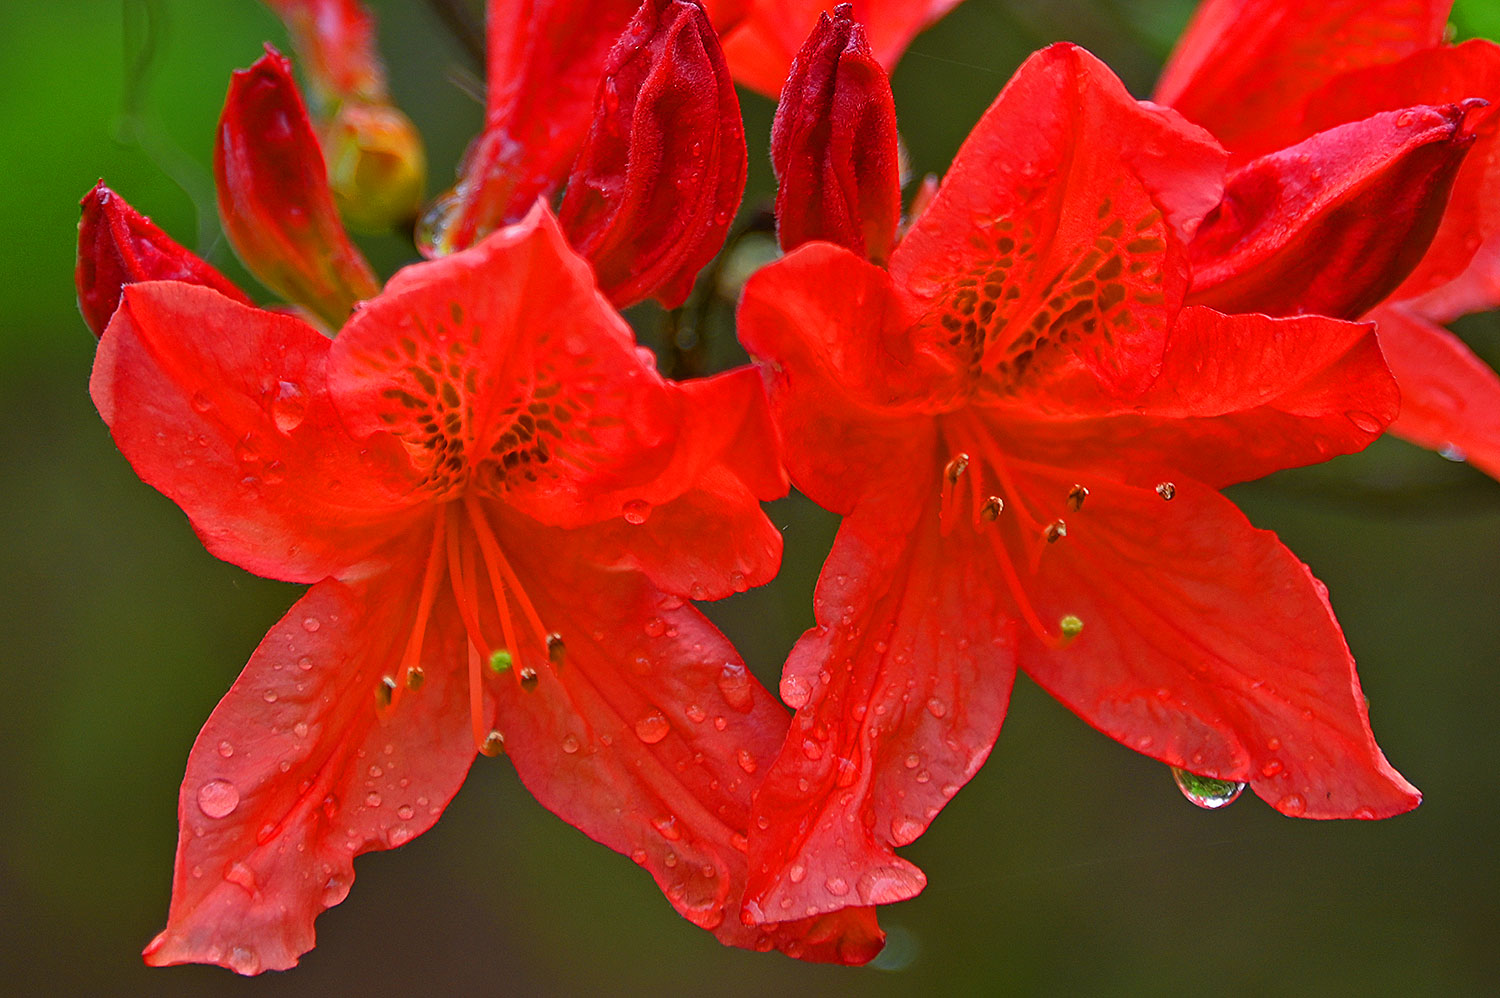 Picture of some wet red flowers after a rain shower